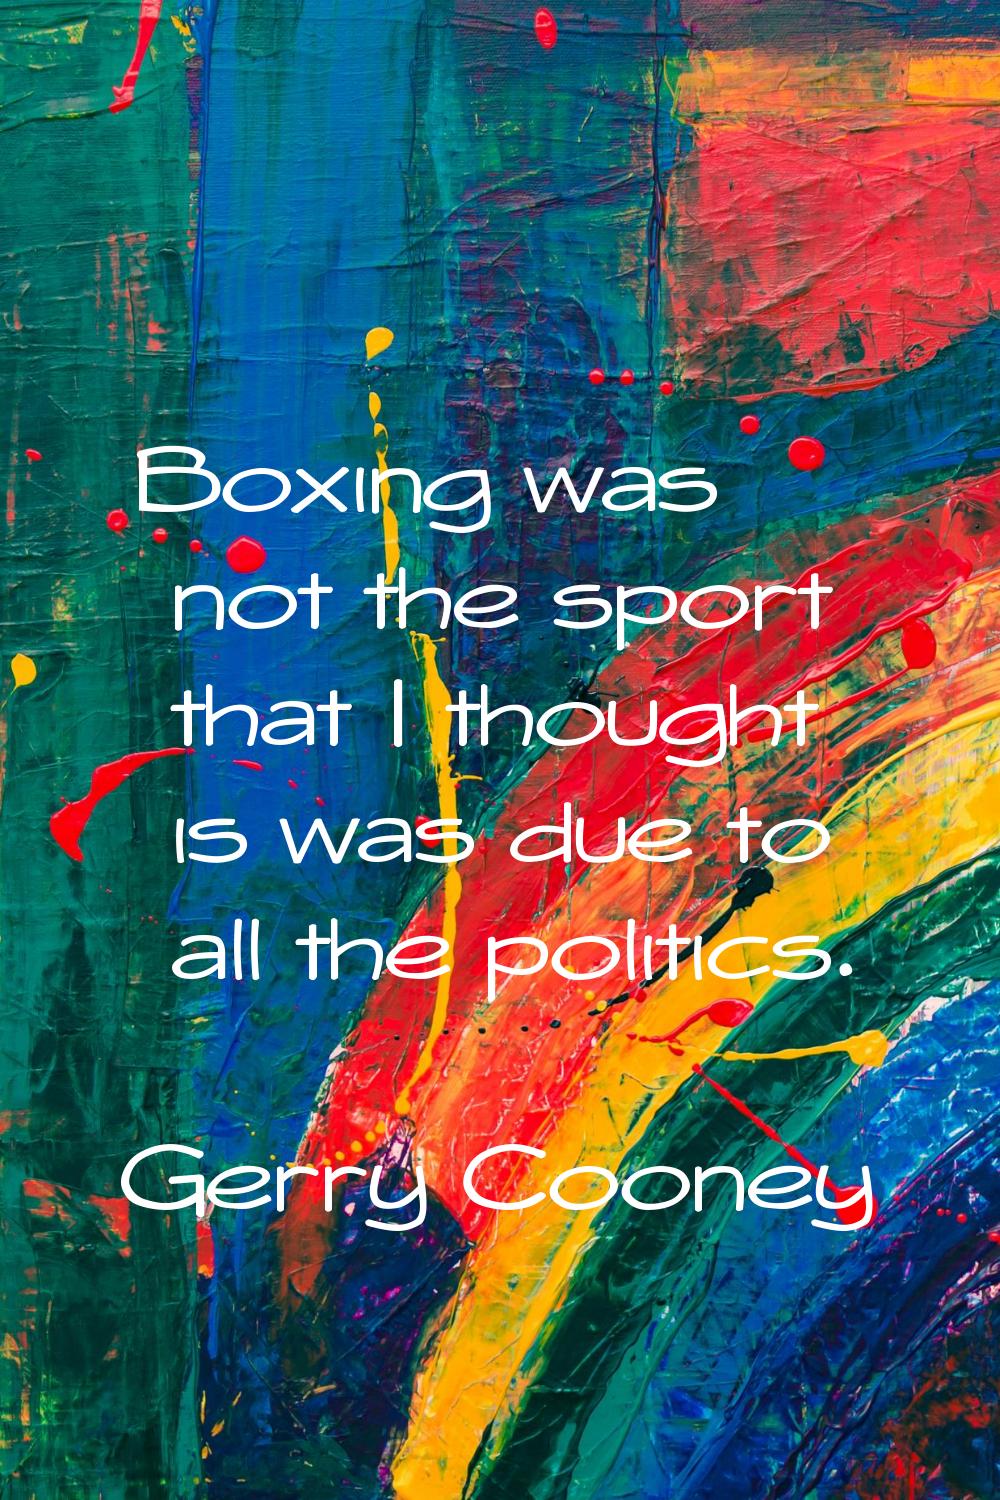 Boxing was not the sport that I thought is was due to all the politics.